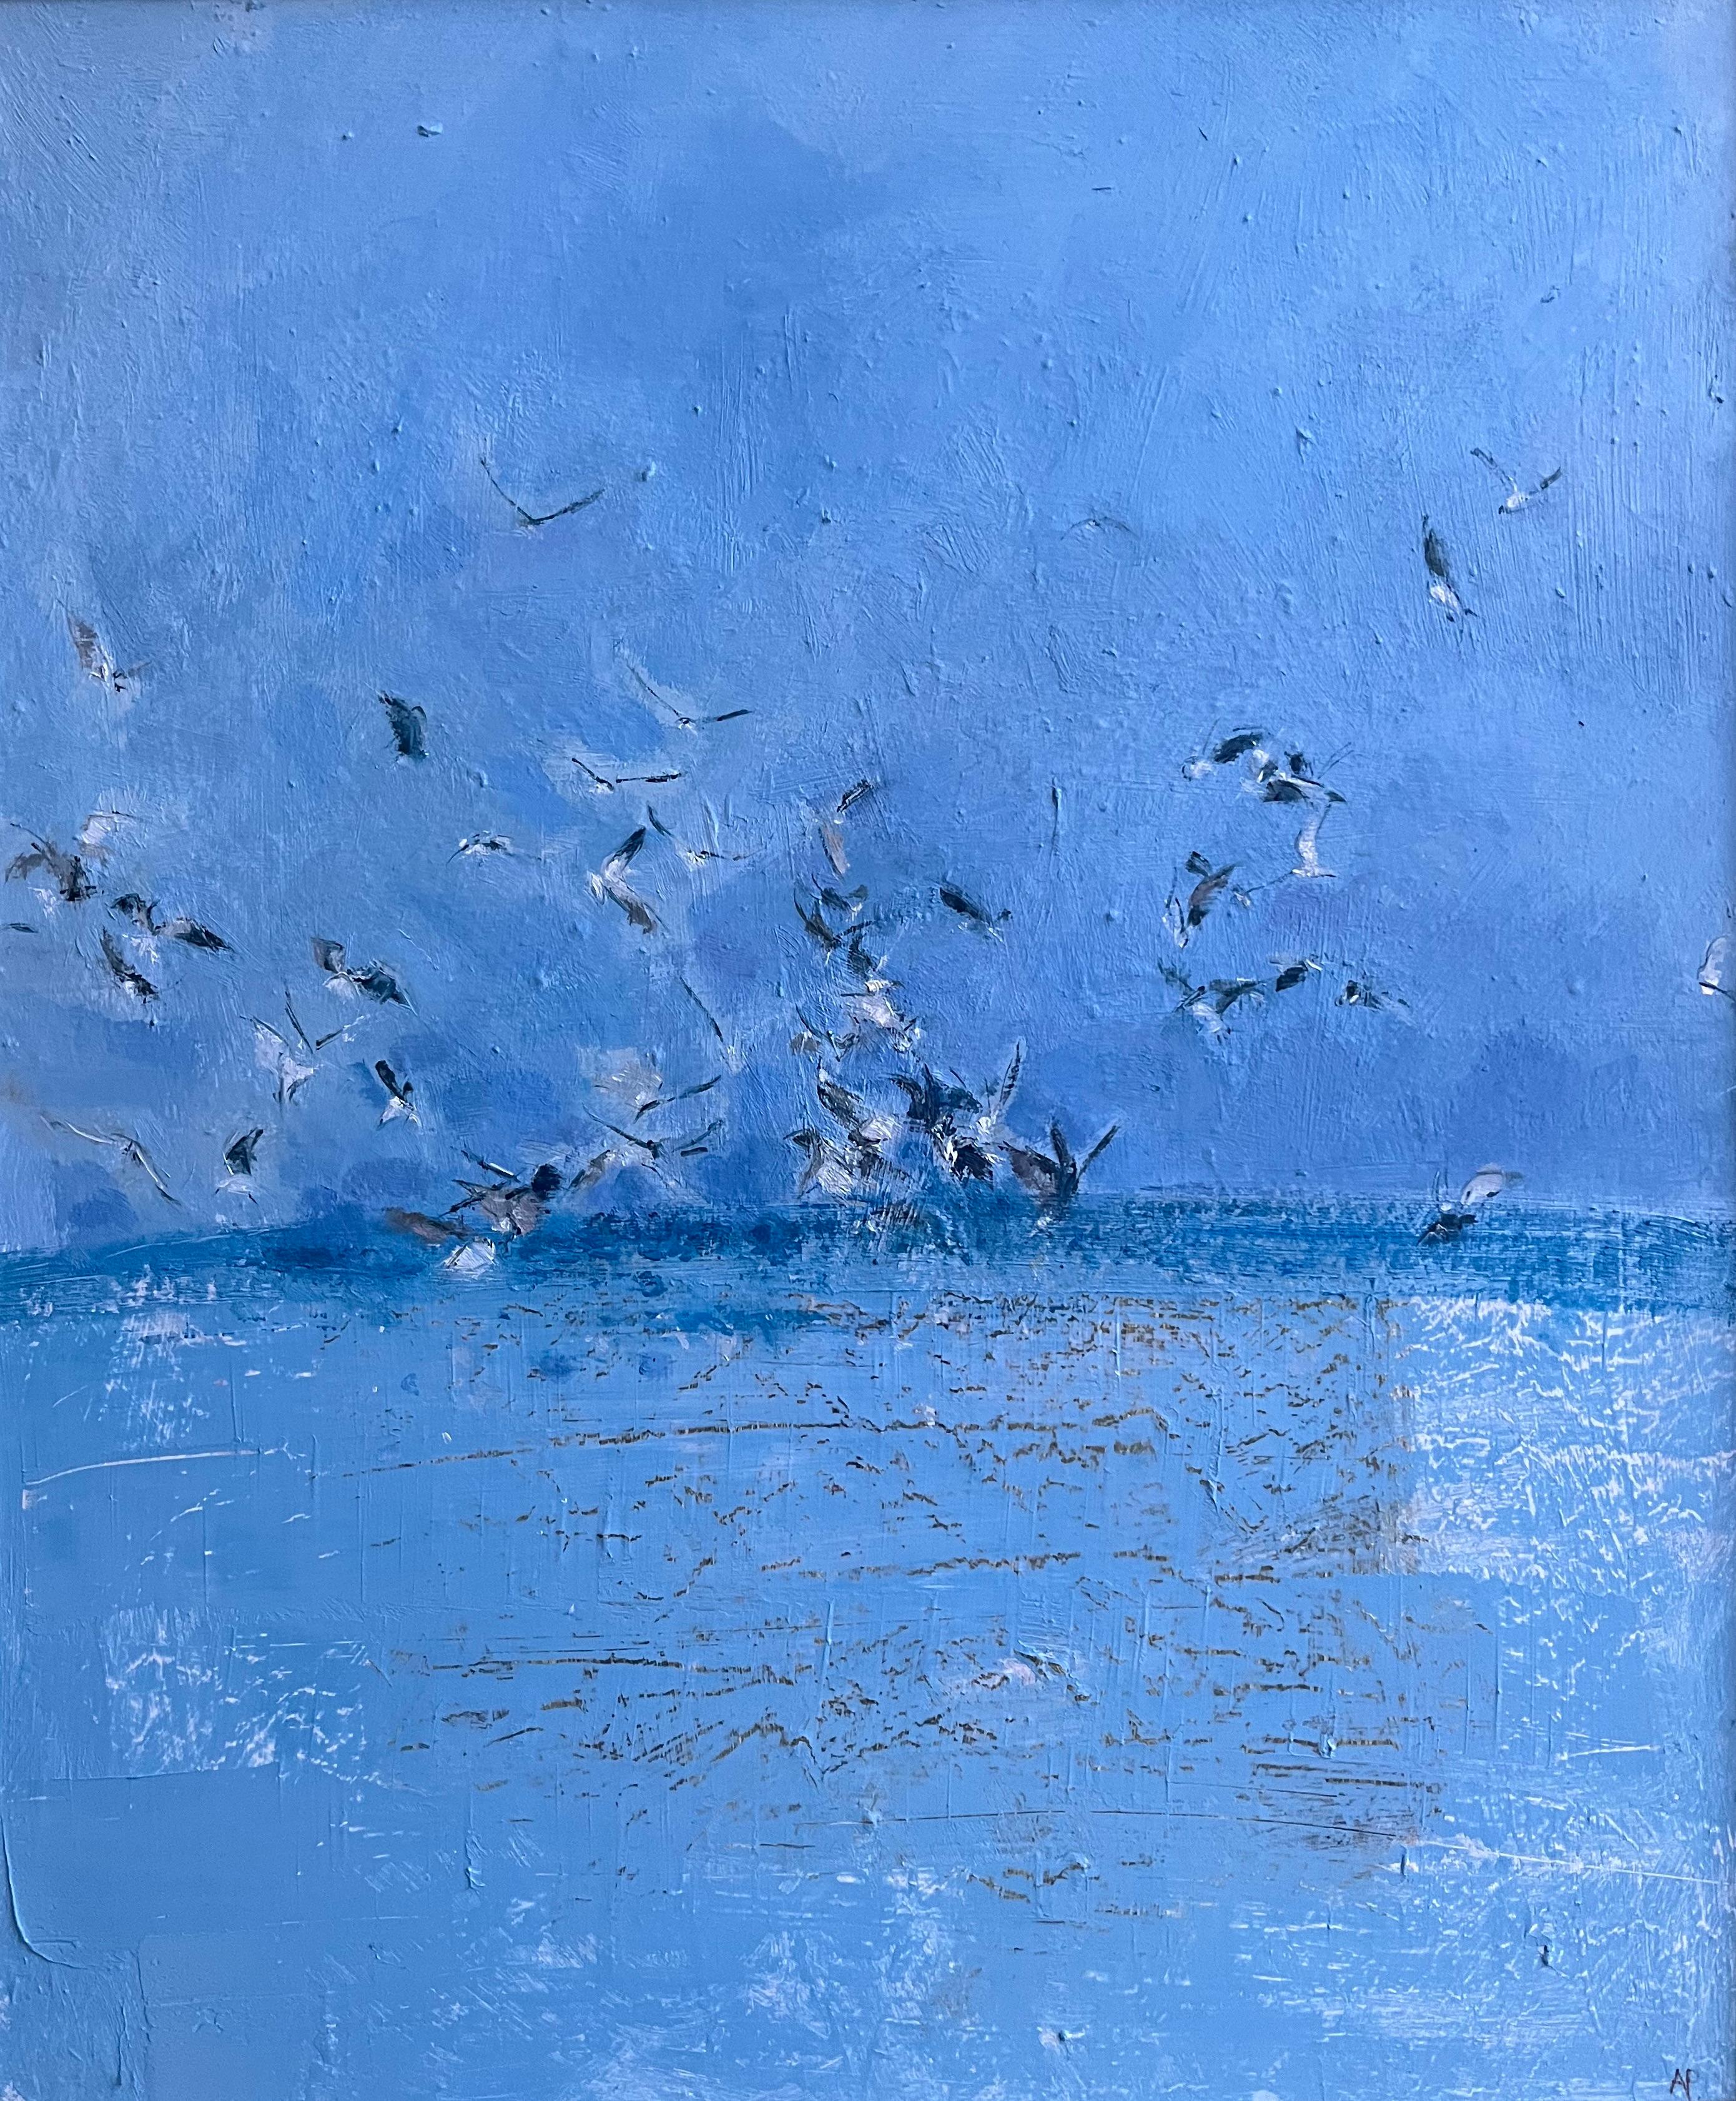 A really striking image of birds in flight at the edge of the sea, capturing the spectrum of wonderful blues in the sea and sky.

Adrian Parnell (b.1952)
Seabirds
Signed with initials
Inscribed with title and date verso
Oil on board
24 x 20 inches